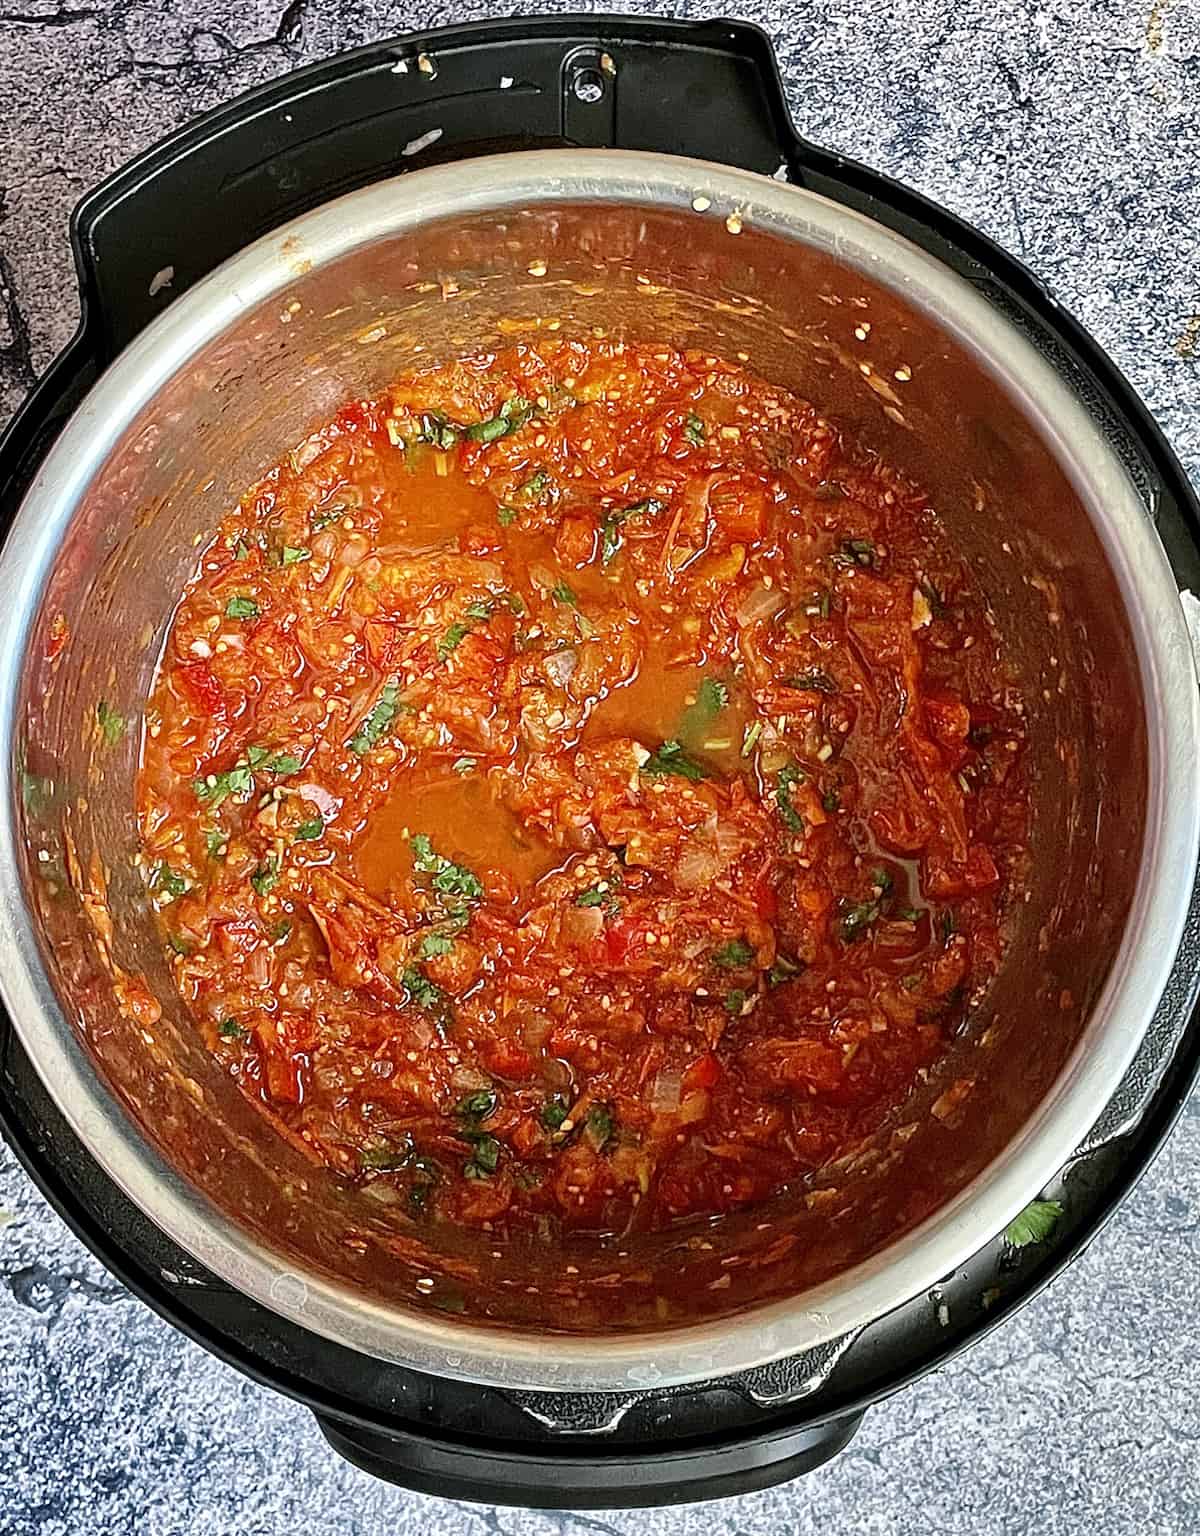 cooked tomatoes and vegetables in the instant pot